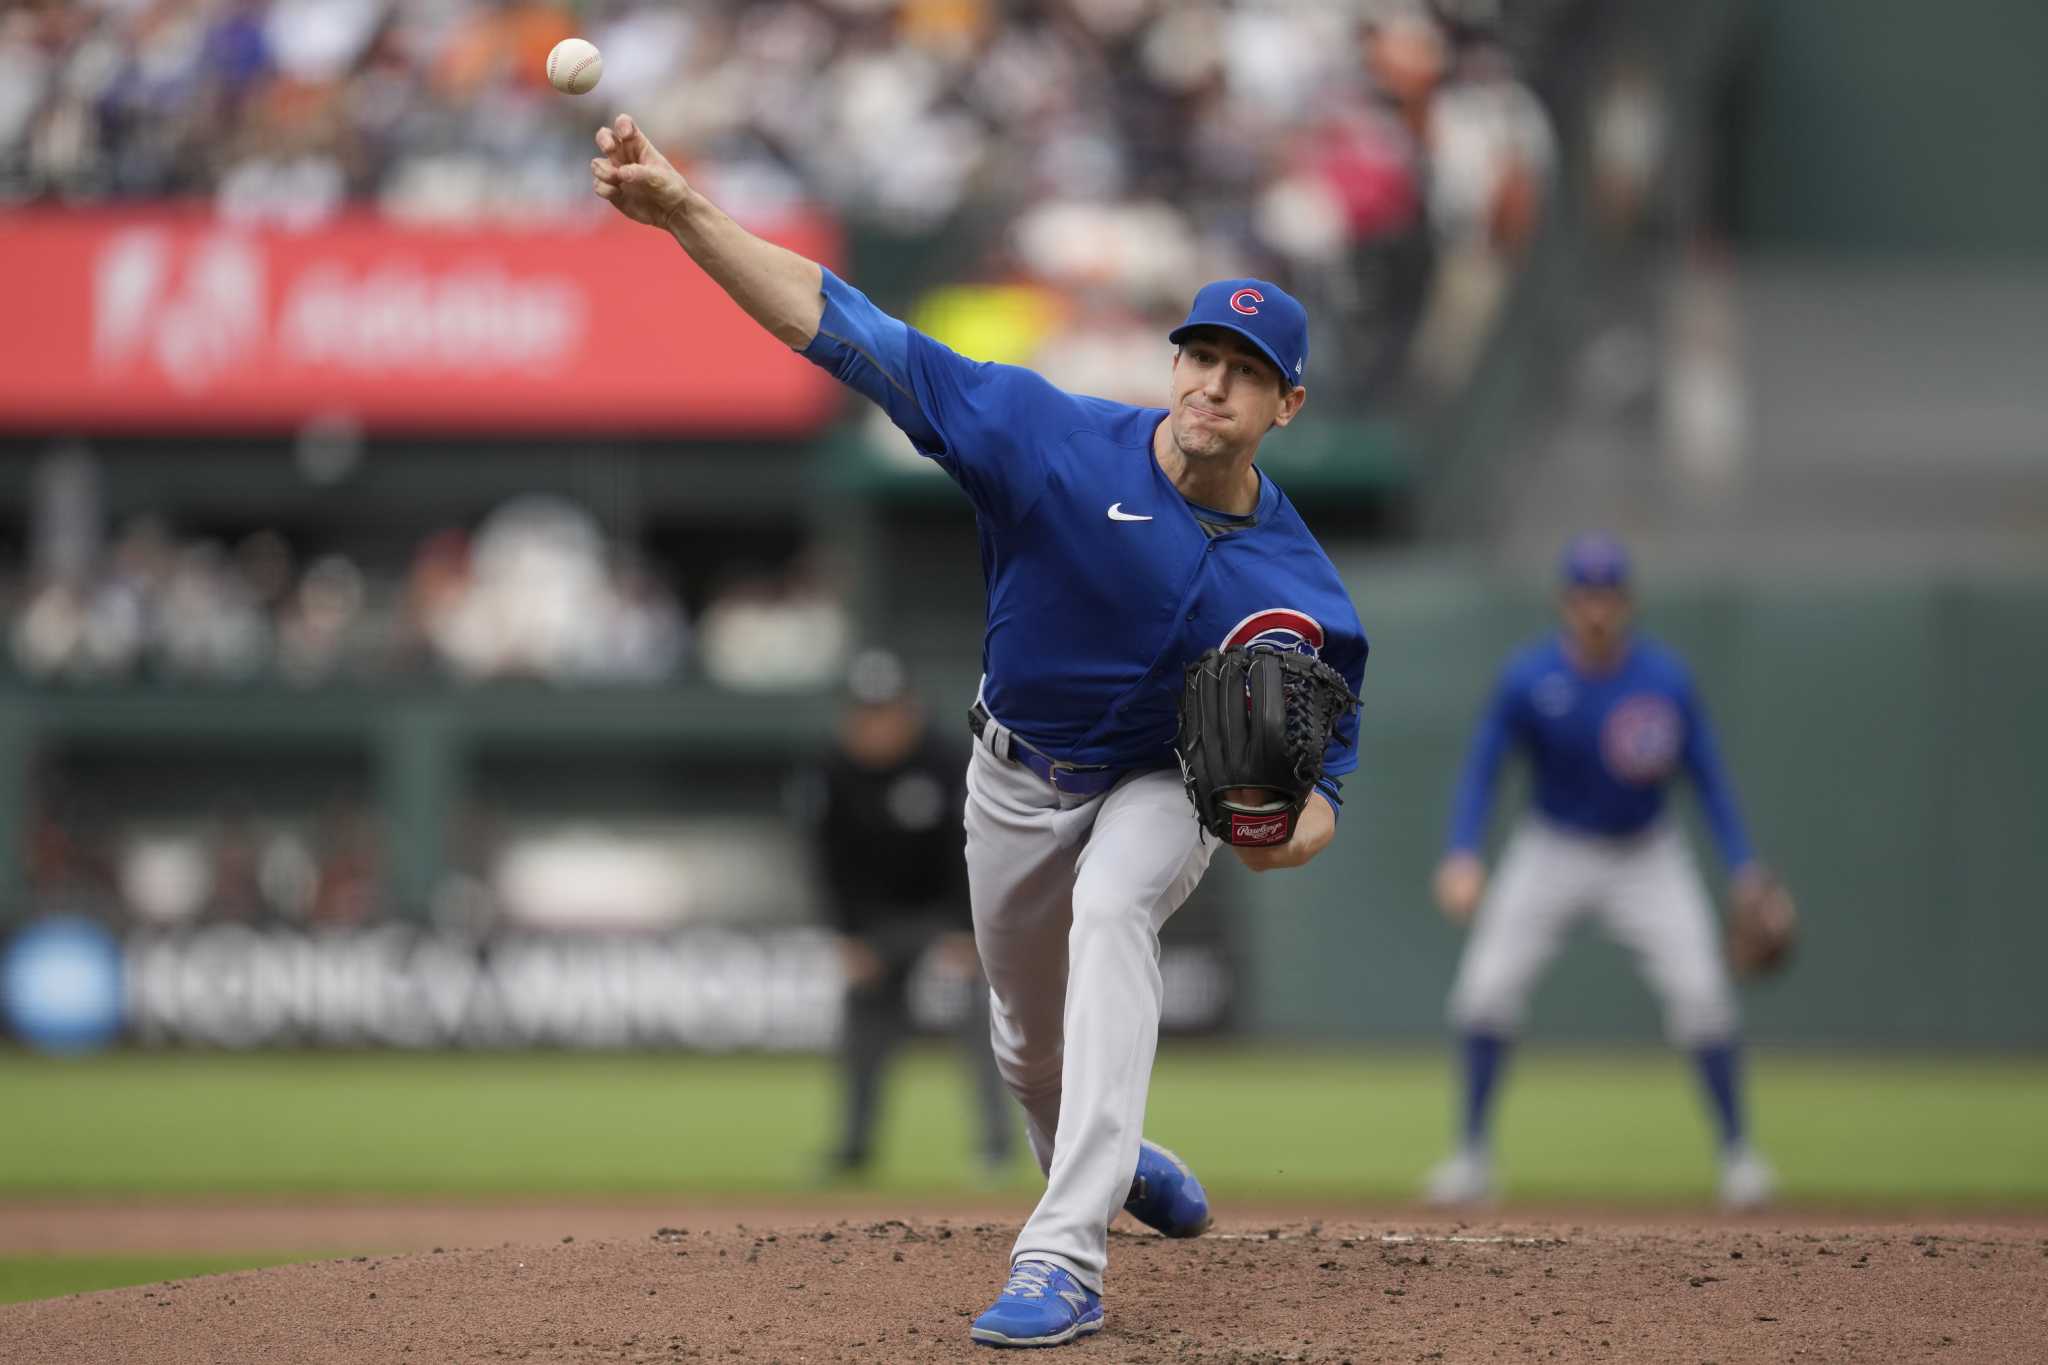 Giants break up Kyle Hendricks' no-hitter in eighth but lose to Cubs